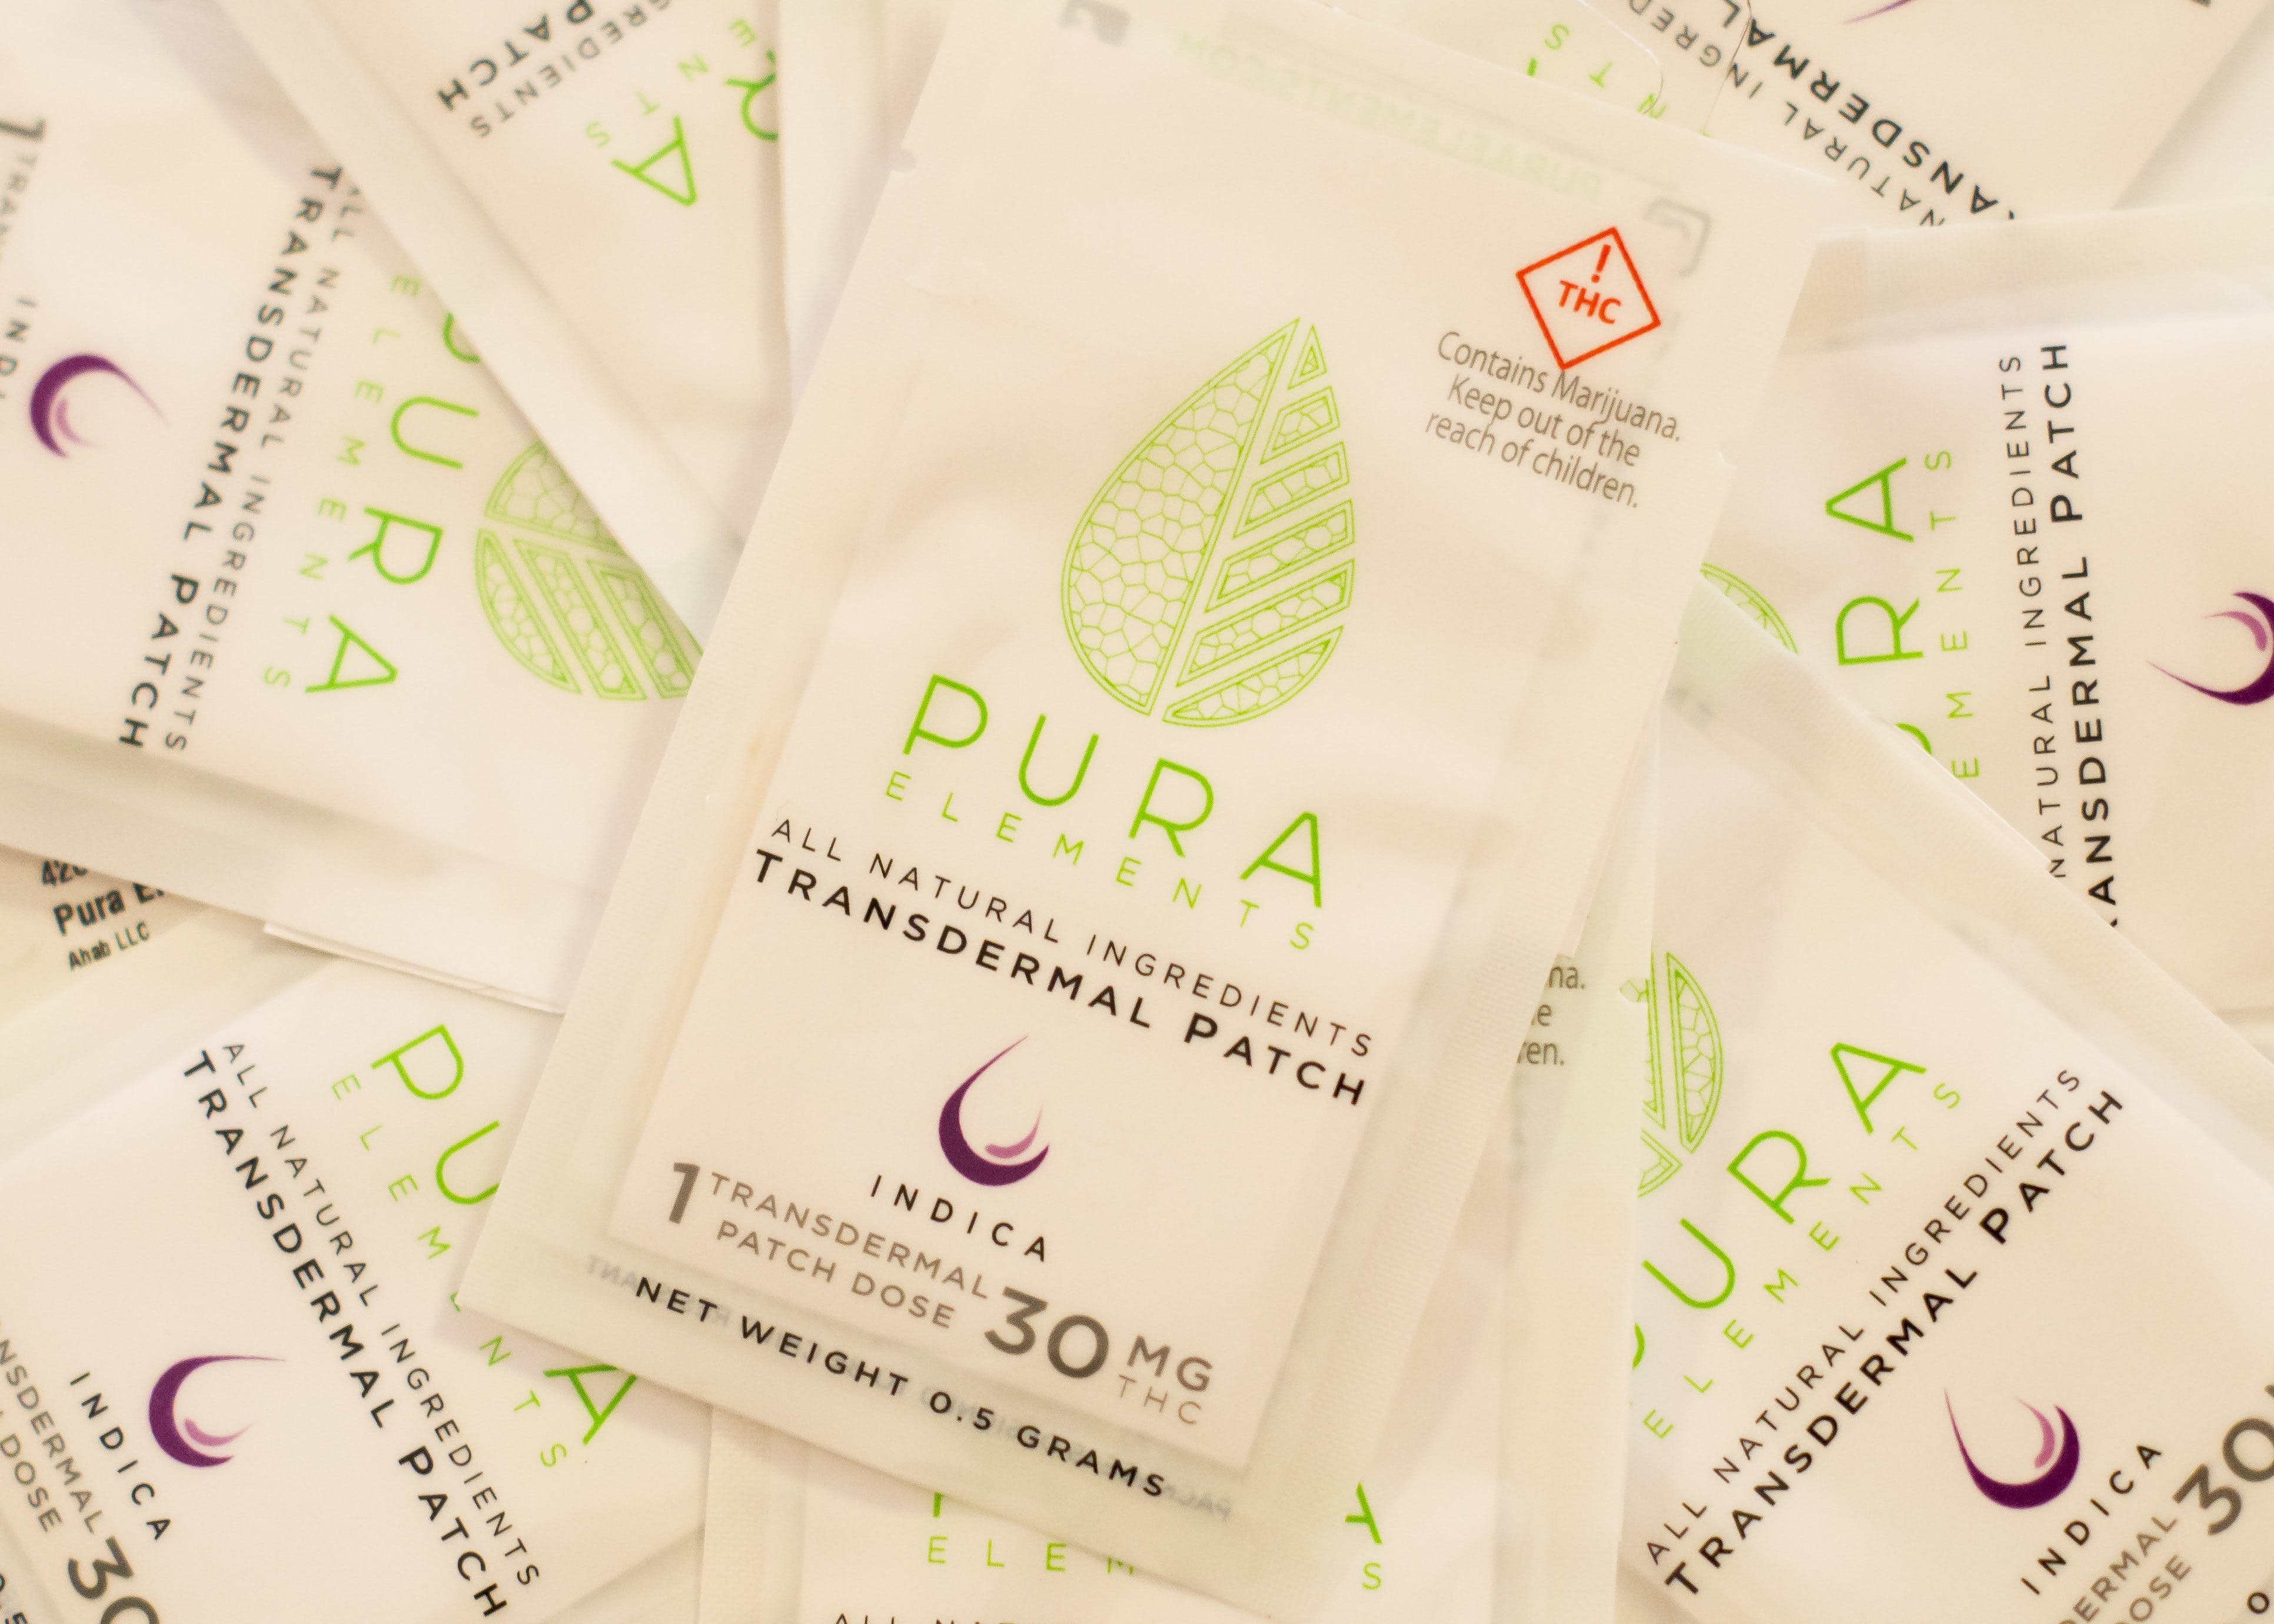 topicals-pura-elements-transdermal-patches-hybrid-2c-indica-30-mg